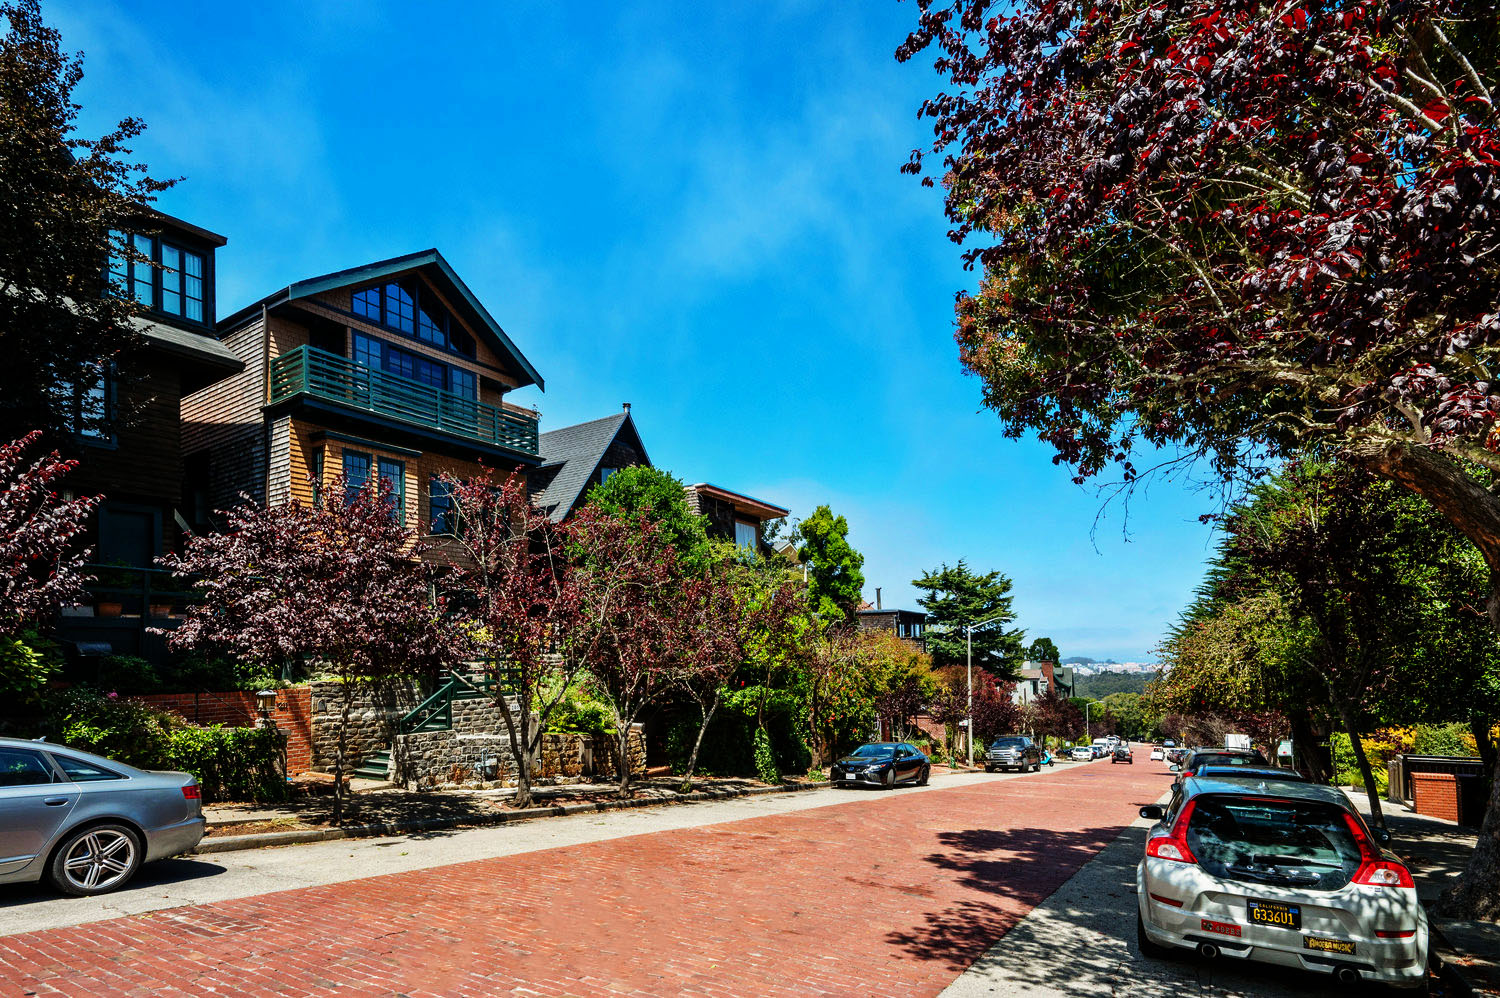 Street view of 205 Edgewood Ave in Cole Valley San Francisco, showing a cobblestone street lined with large homes near Sutro Forrest and UCSF